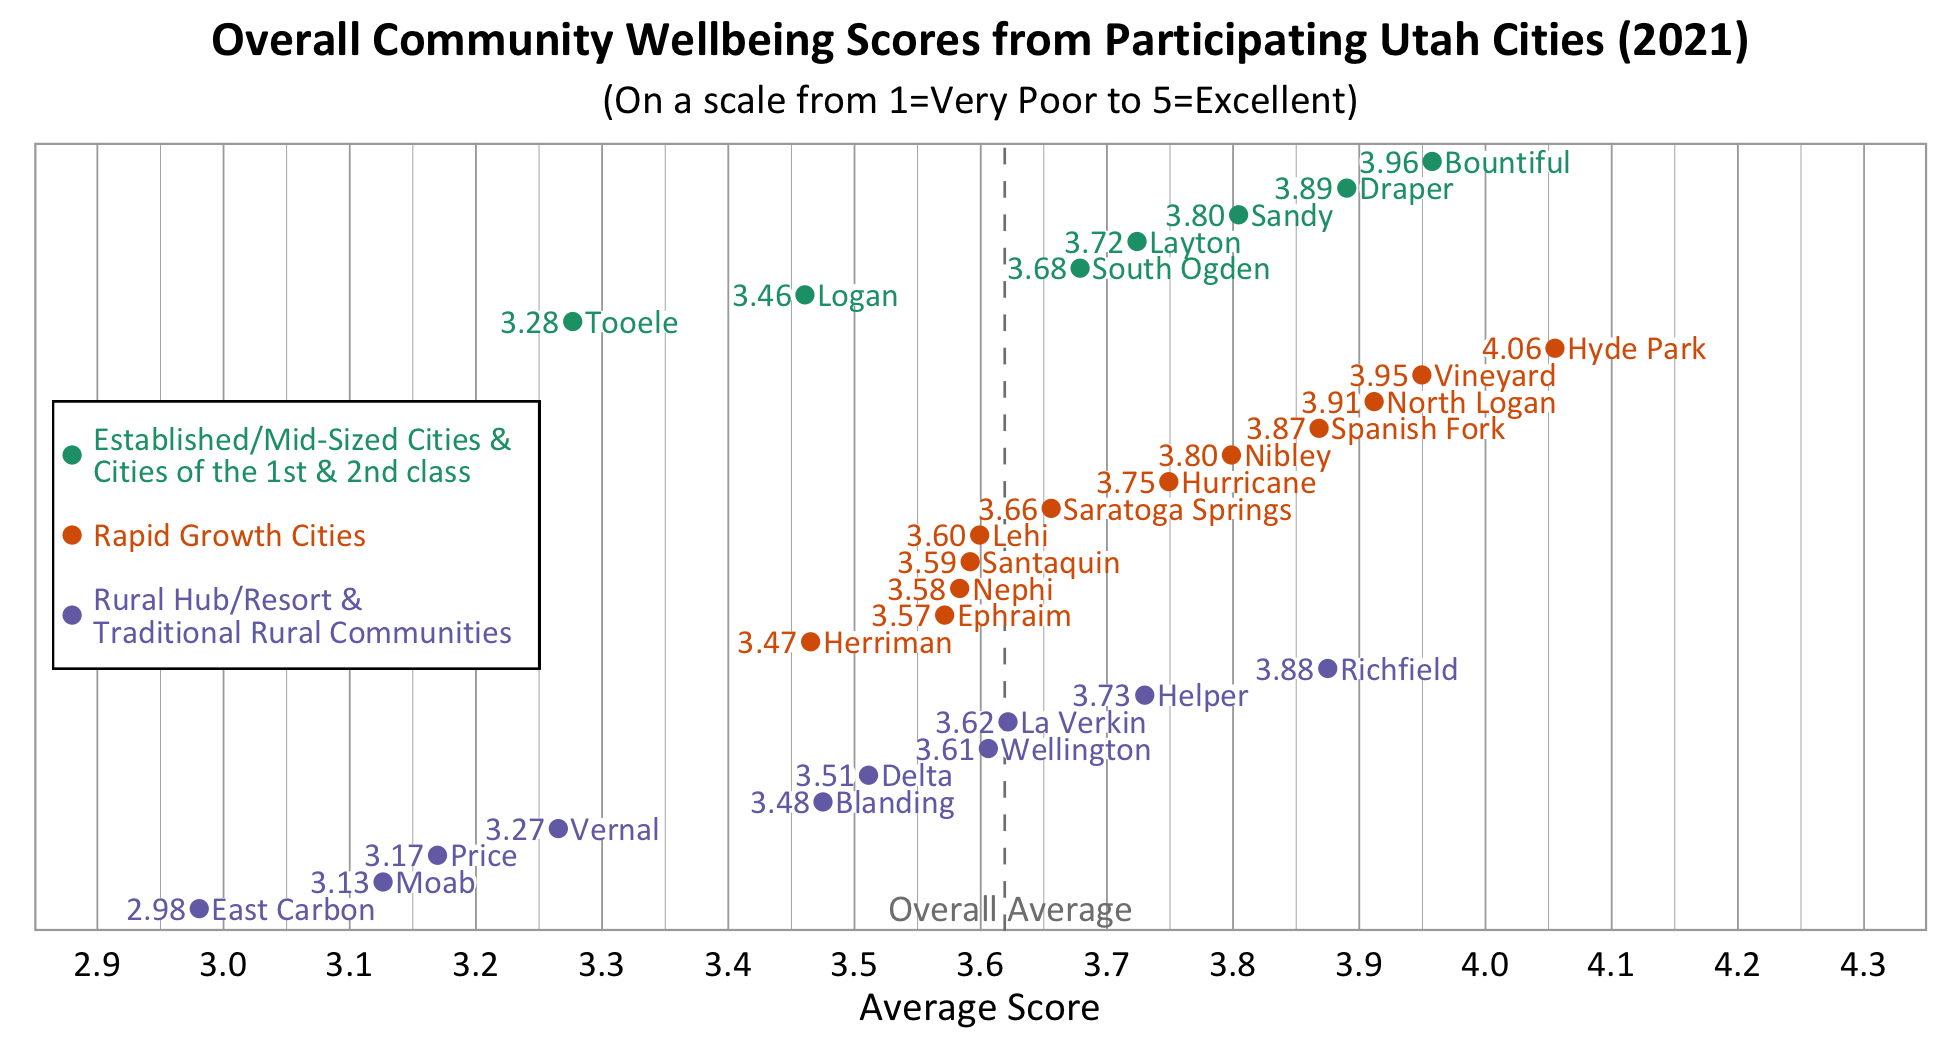 Dot Plot. Title: Overall Community Wellbeing Scores from Participating Utah Cities (2021). Subtitle: (On a scale from 1=Very Poor to 5=Excellent). Group: Established/Mid-Sized Cities. Bountiful: Average Score 3.96; Draper: Average Score 3.89; Sandy: Average Score 3.80; Layton: Average Score 3.72; South Ogden: Average Score 3.68; Logan: Average Score 3.46; Tooele: Average Score 3.28. Group: Rapid Growth Cities. Hyde Park: Average Score 4.06; Vineyard: Average Score 3.95; North Logan: Average Score 3.91; Spanish Fork: Average Score 3.87; Nibley: Average Score 3.80; Hurricane: Average Score 3.75; Saratoga Springs: Average Score 3.66; Lehi: Average Score 3.60; Santaquin: Average Score 3.59; Nephi: Average Score 3.58; Ephraim: Average Score 3.57; Herriman: Average Score 3.47. Group: Rural, Rural Hub, & Resort and Traditional Communities. Richfield: Average Score 3.88; Helper: Average Score 3.73; La Verkin: Average Score 3.62; Wellington: Average Score 3.61; Delta: Average Score 3.51; Blanding: Average Score 3.48; Vernal: Average Score 3.27; Price: Average Score 3.17, Moab: Average Score: 3.13; East Carbon: Average Score 2.98. 